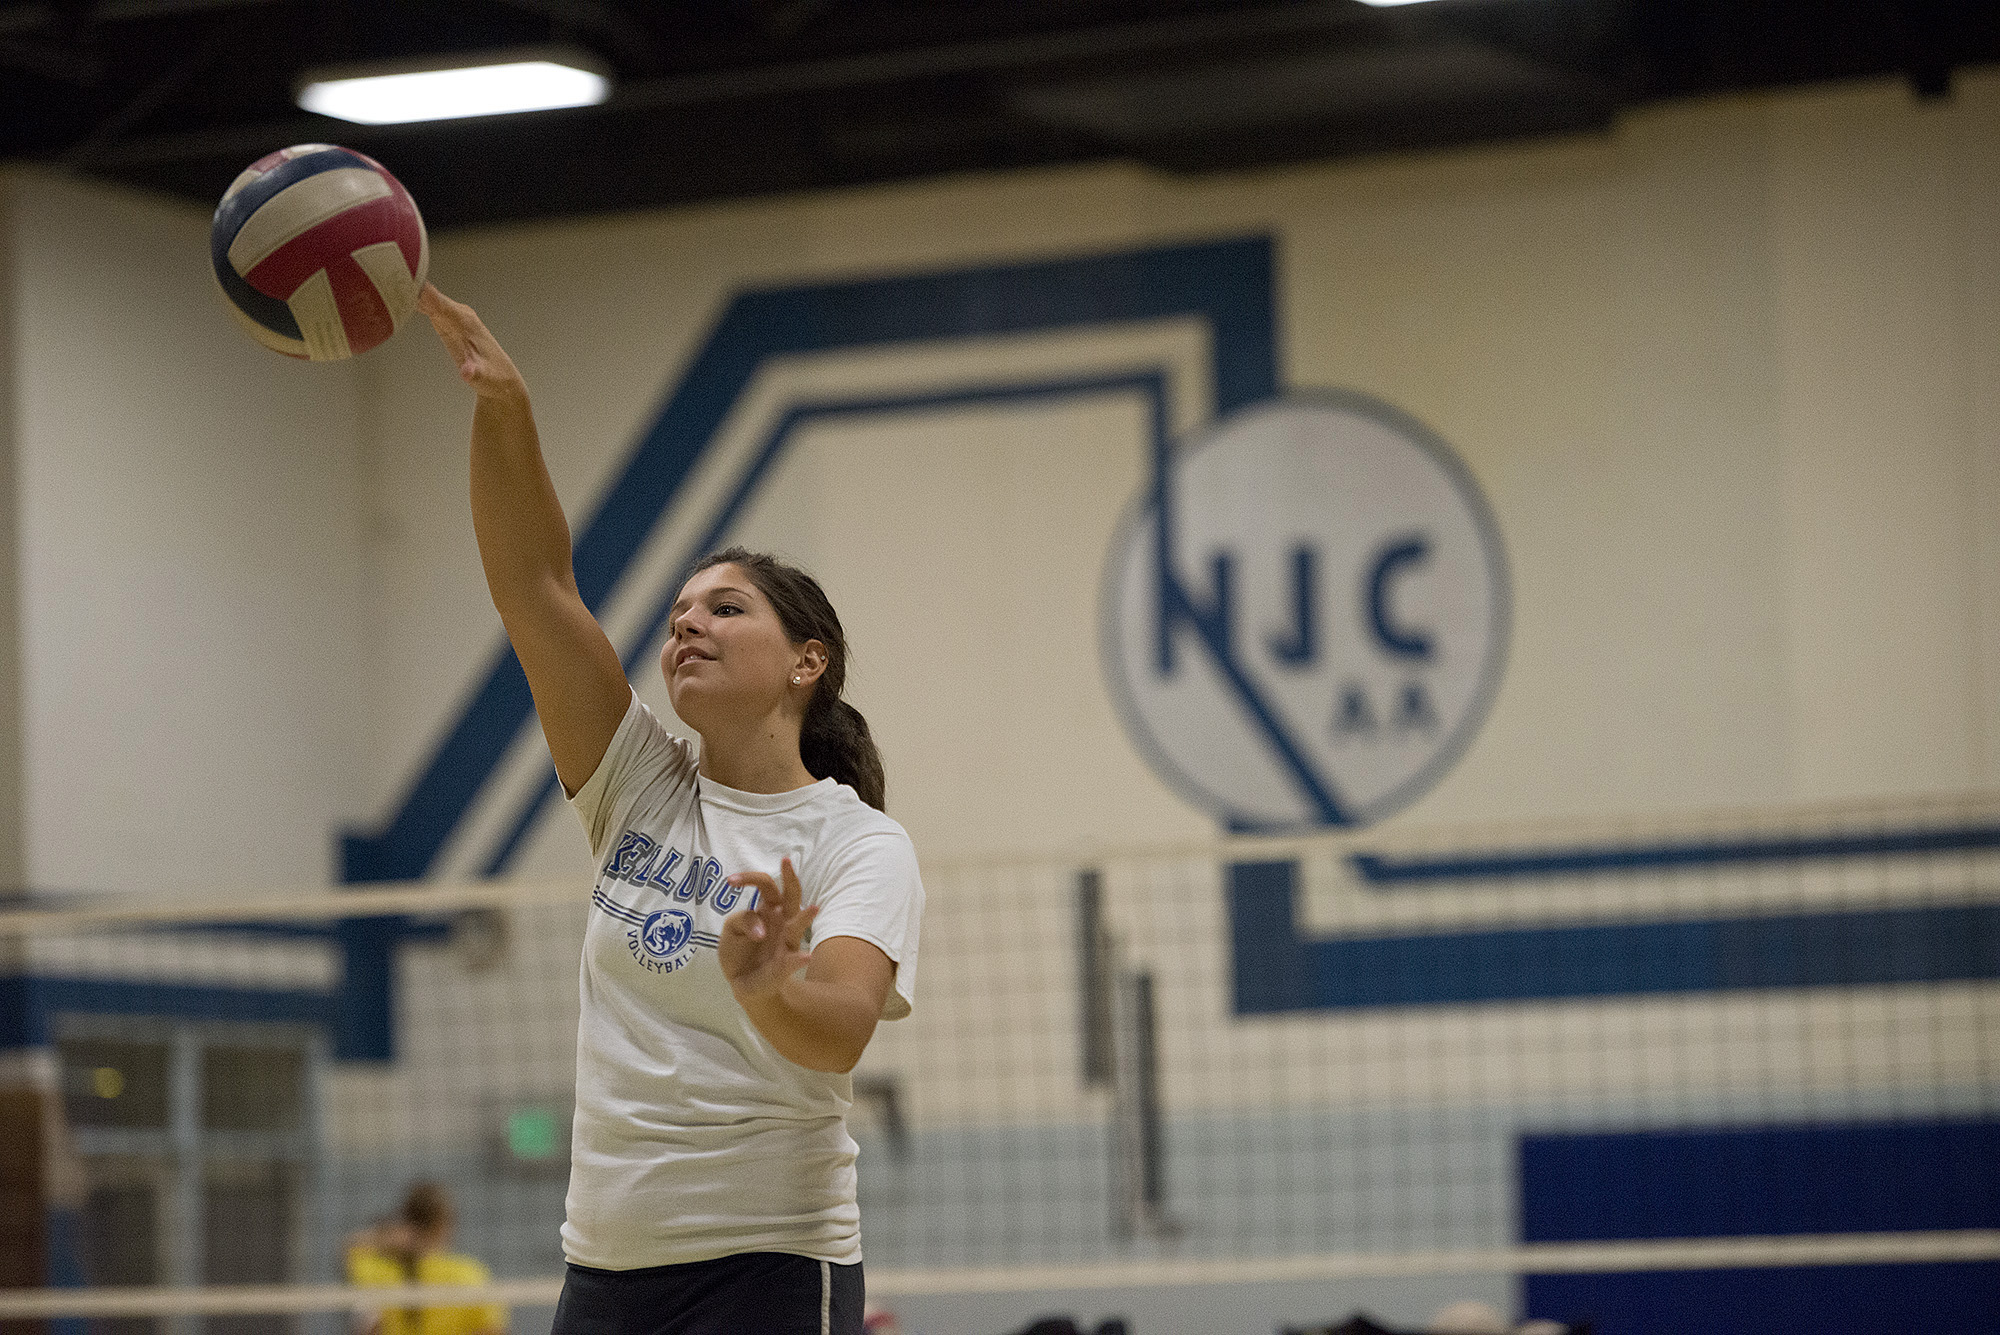 A KCC women's volleyball player hitting a volleyball in the gym.